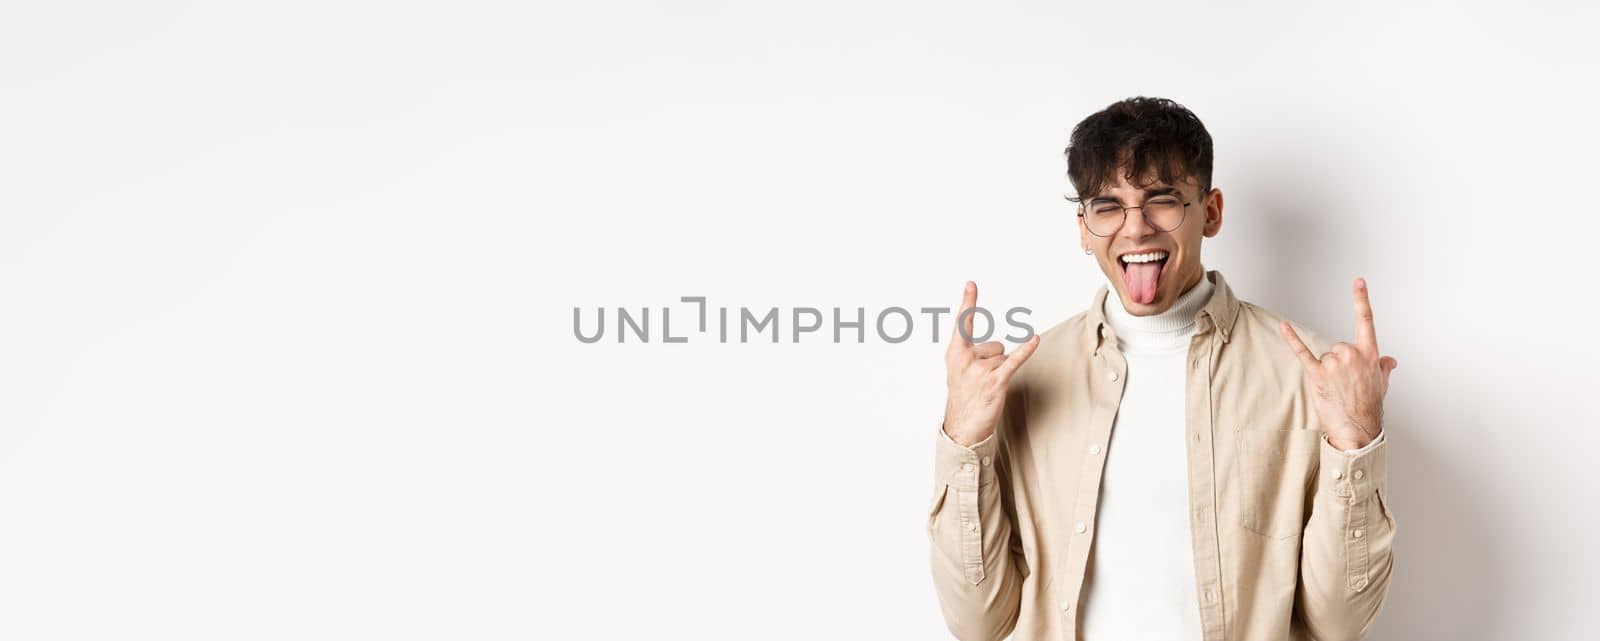 Happy handsome guy showing tongue and rock-on gesture, having fun and feeling upbeat, enjoying something good, standing on white background.